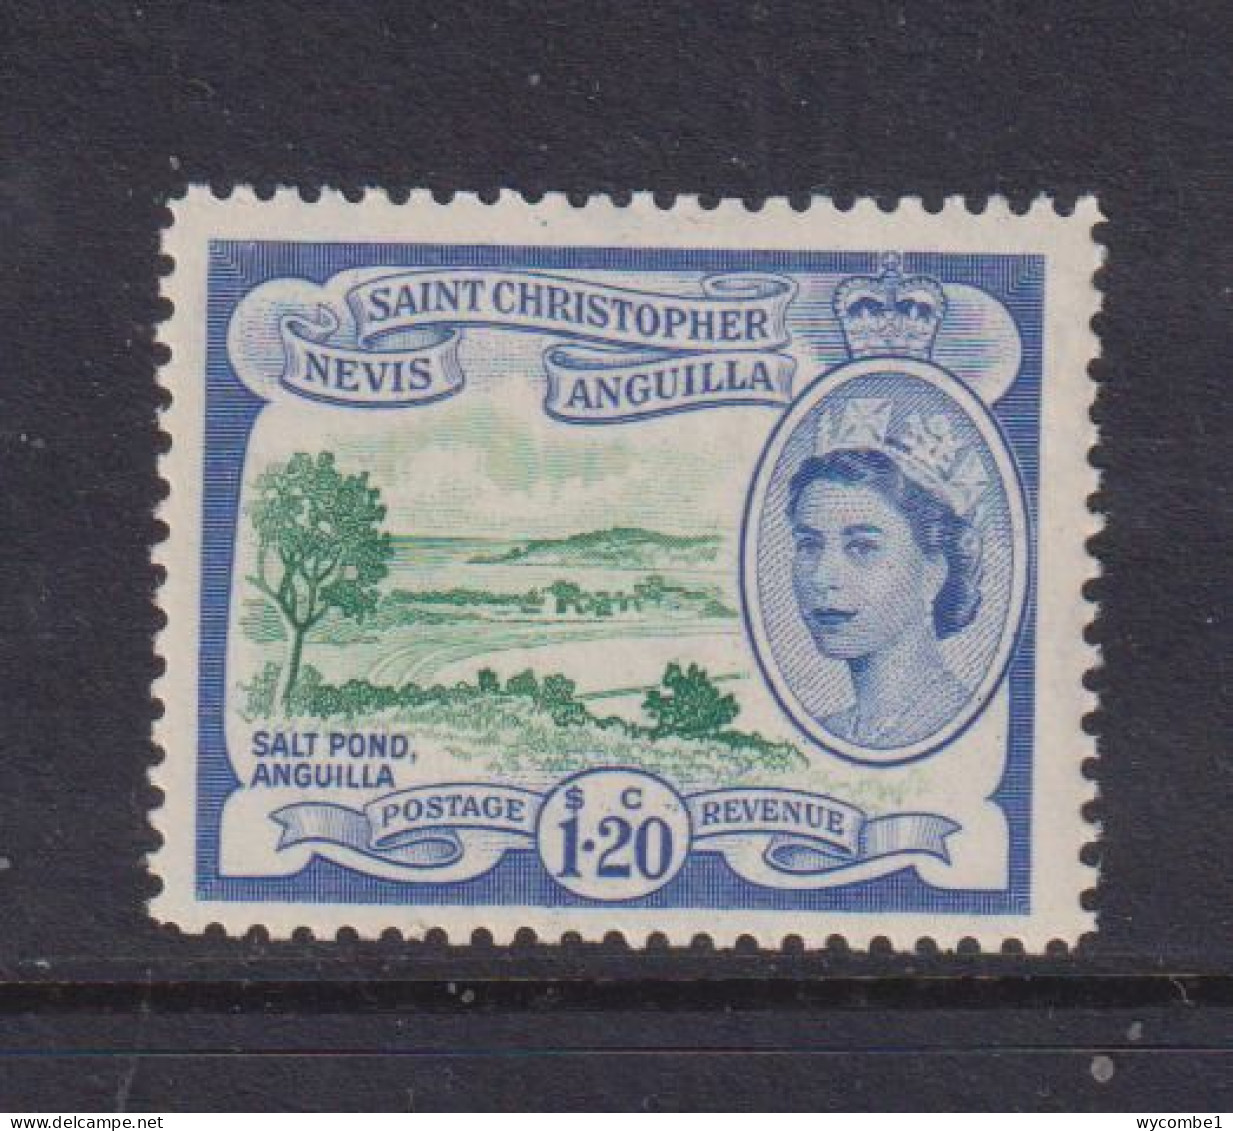 ST CHRISTOPHER NEVIS AND ANGUILLA - 1954  $1.20 Never Hinged Mint - St.Christopher, Nevis En Anguilla (...-1980)